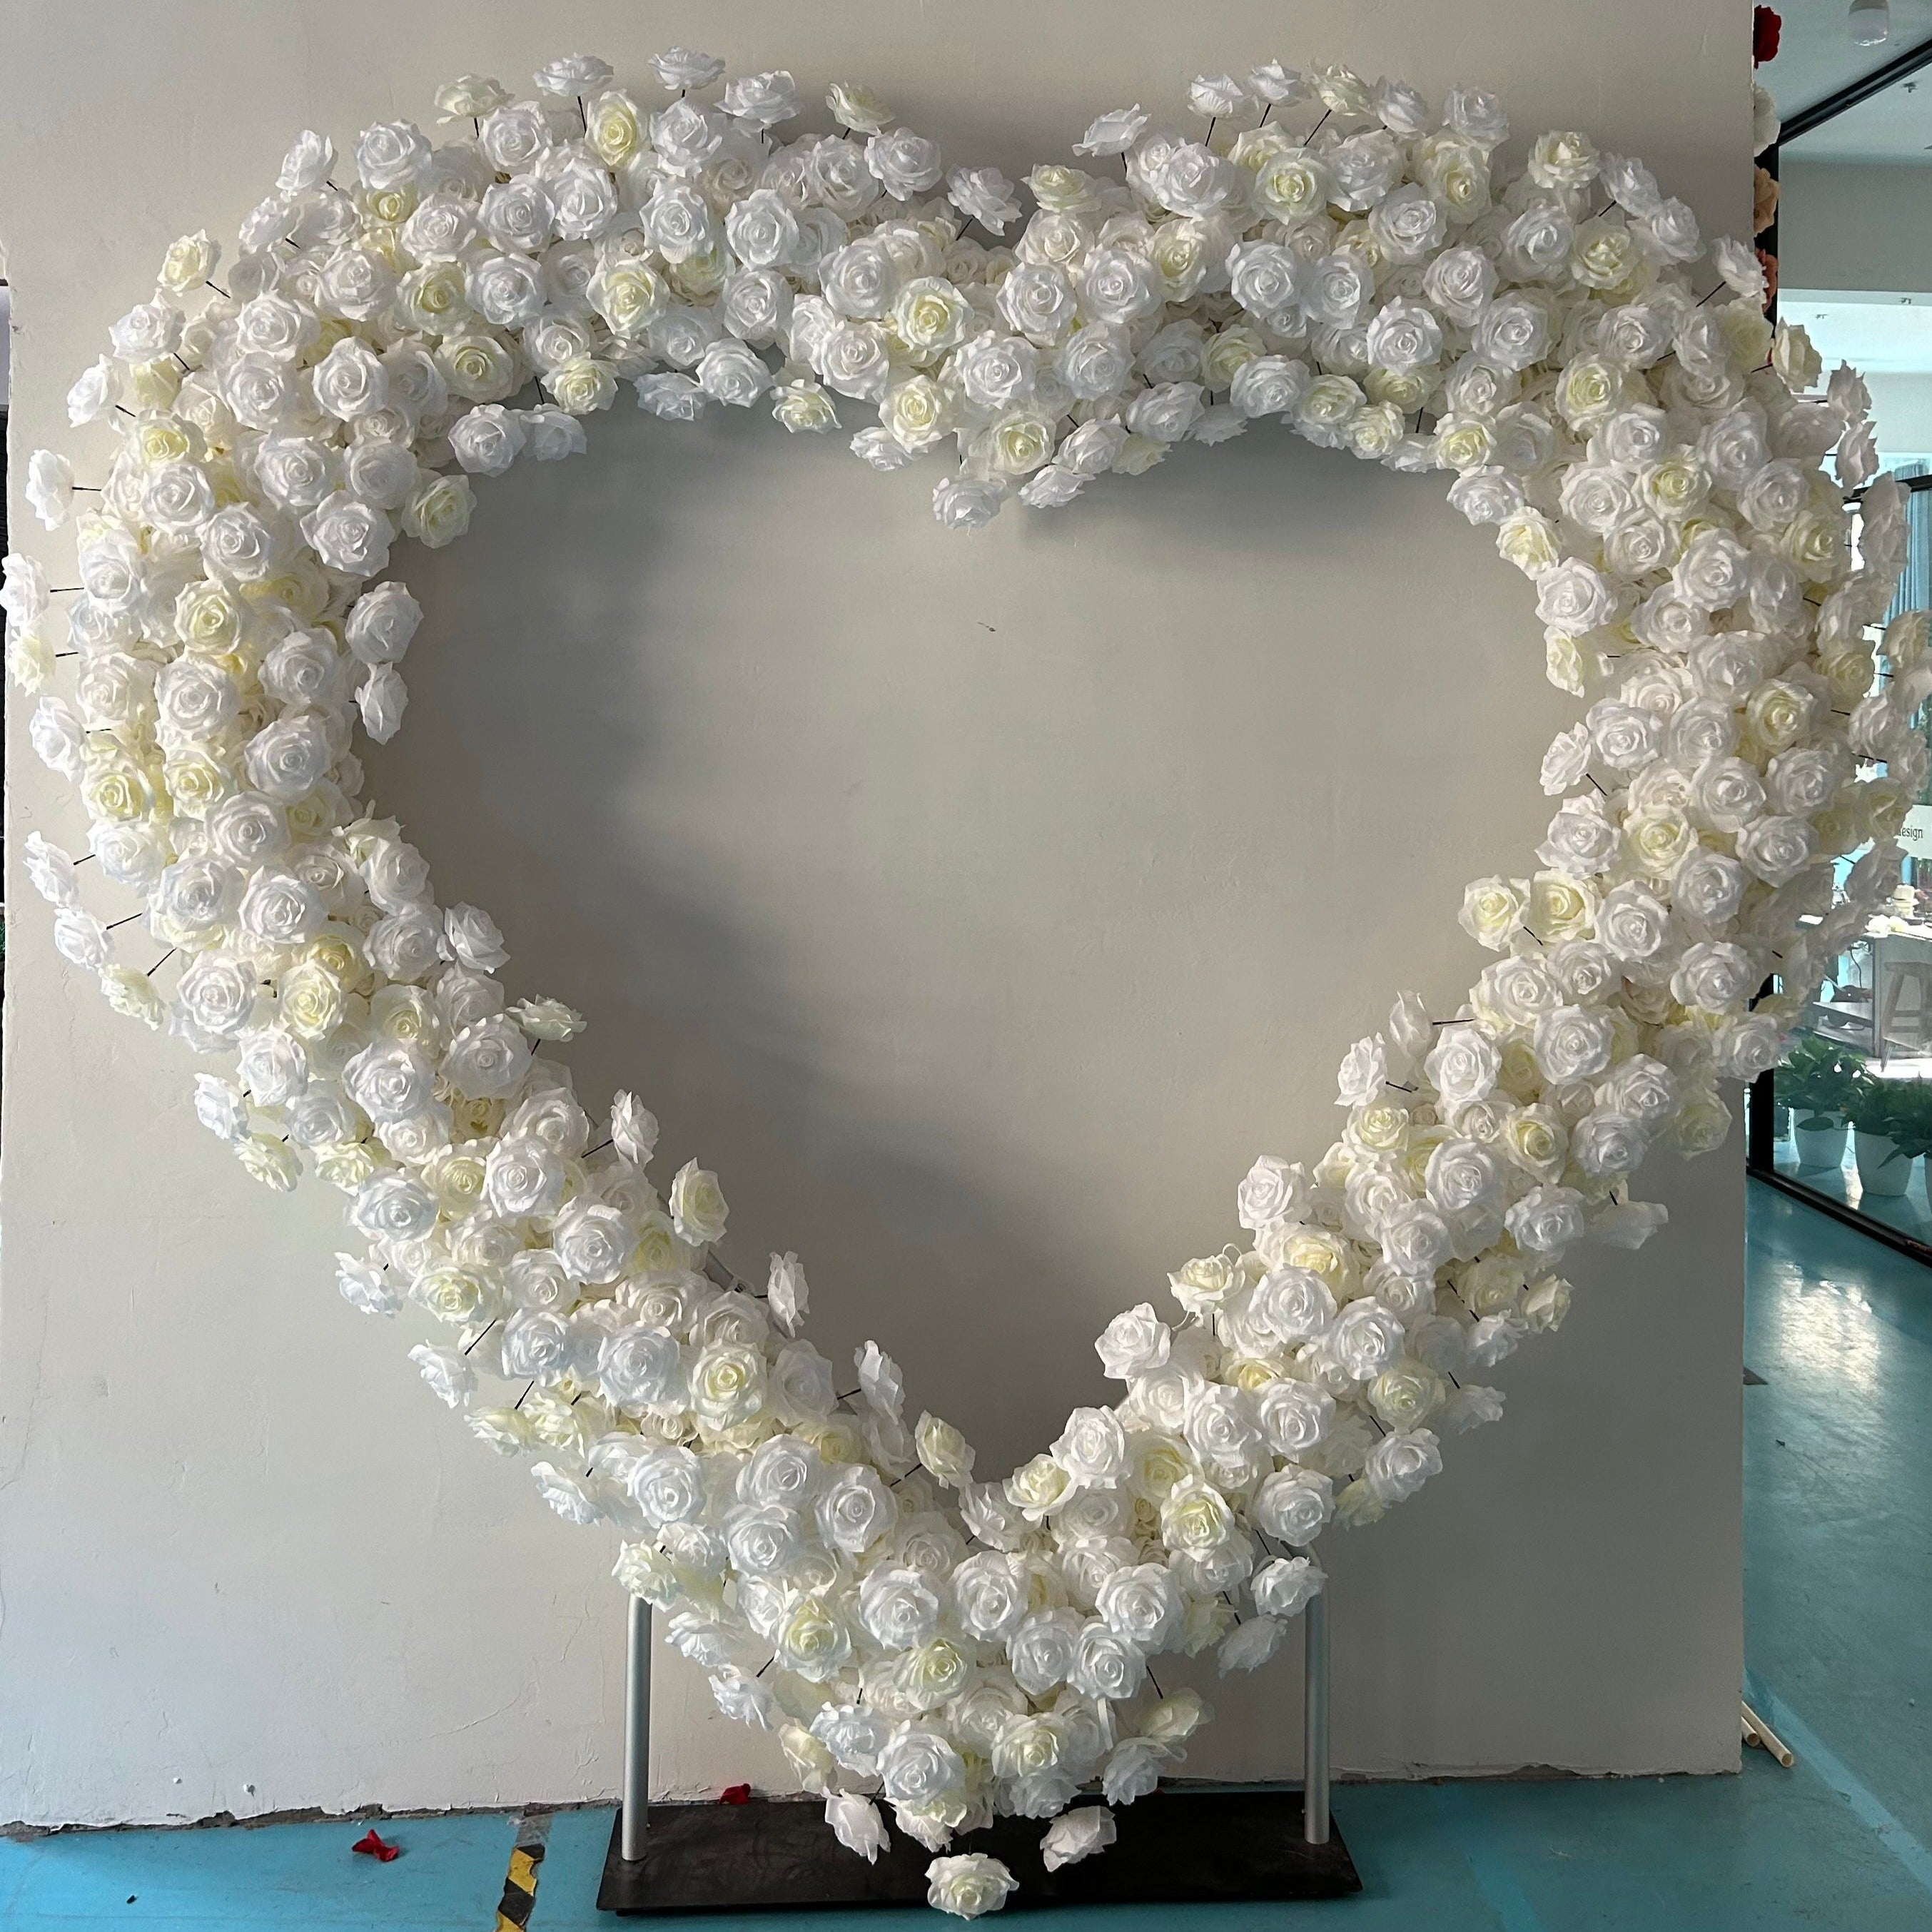 Flower Arch White Roses Heart Shaped Floral Set Flower Wall Fabric Backdrop Proposal Wedding Party Decor